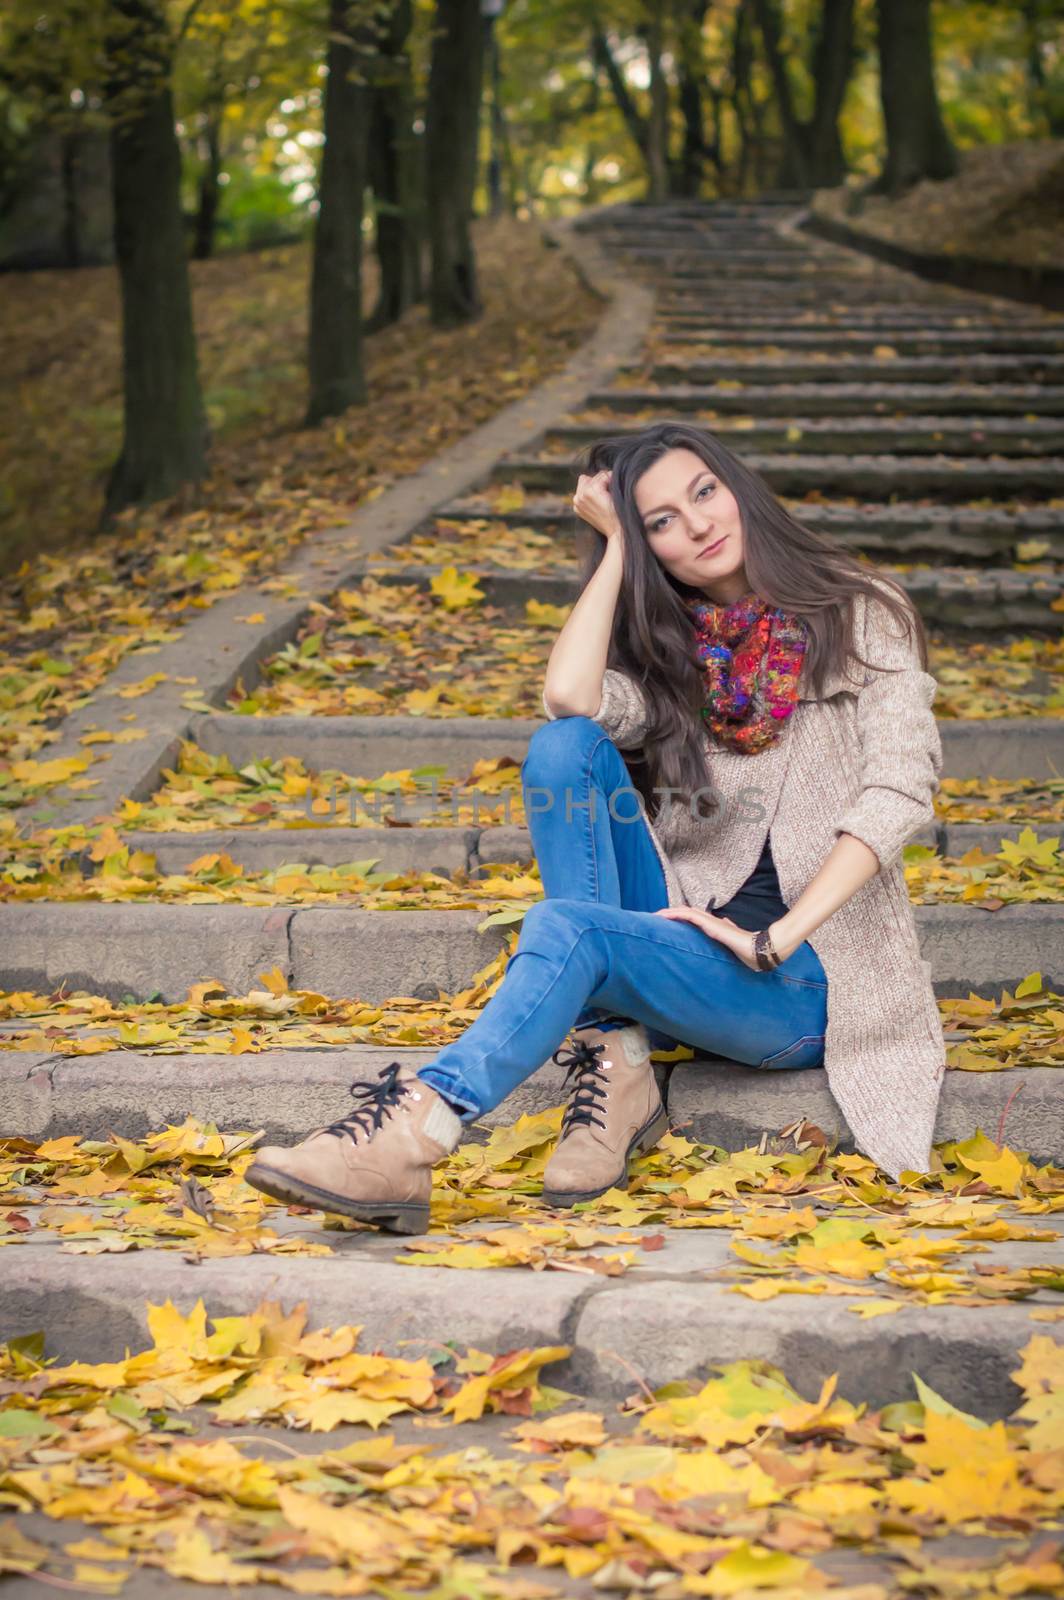 girl sitting on stone steps in autumn Park